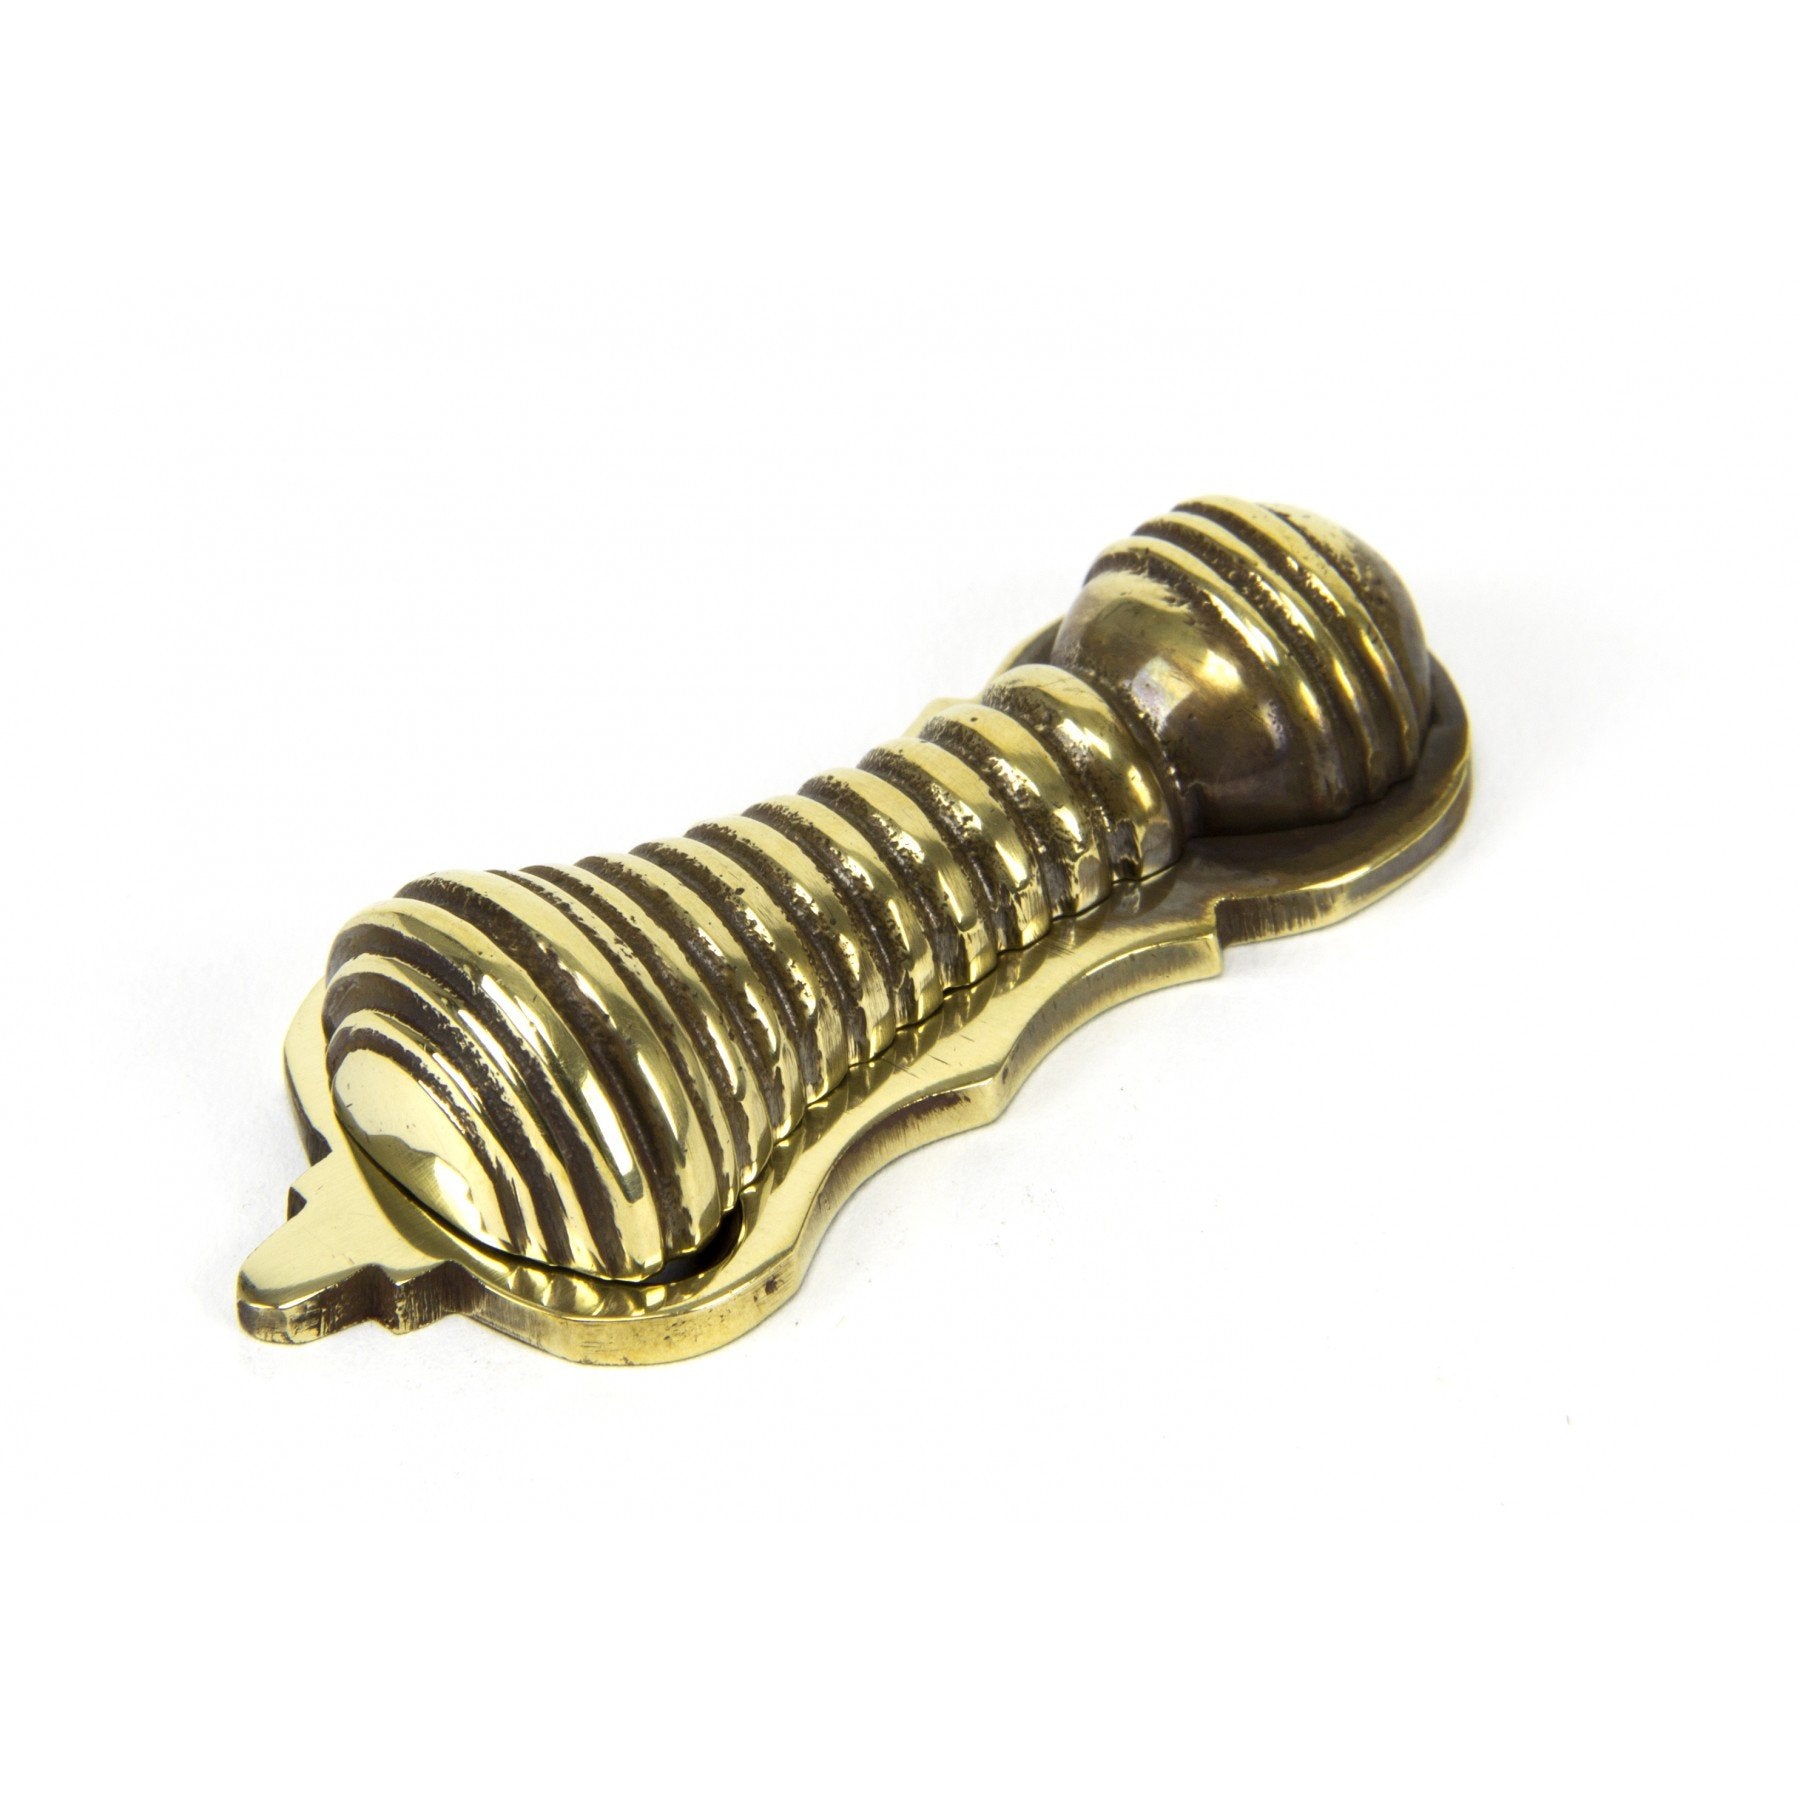 From the Anvil Aged Brass Beehive Escutcheon